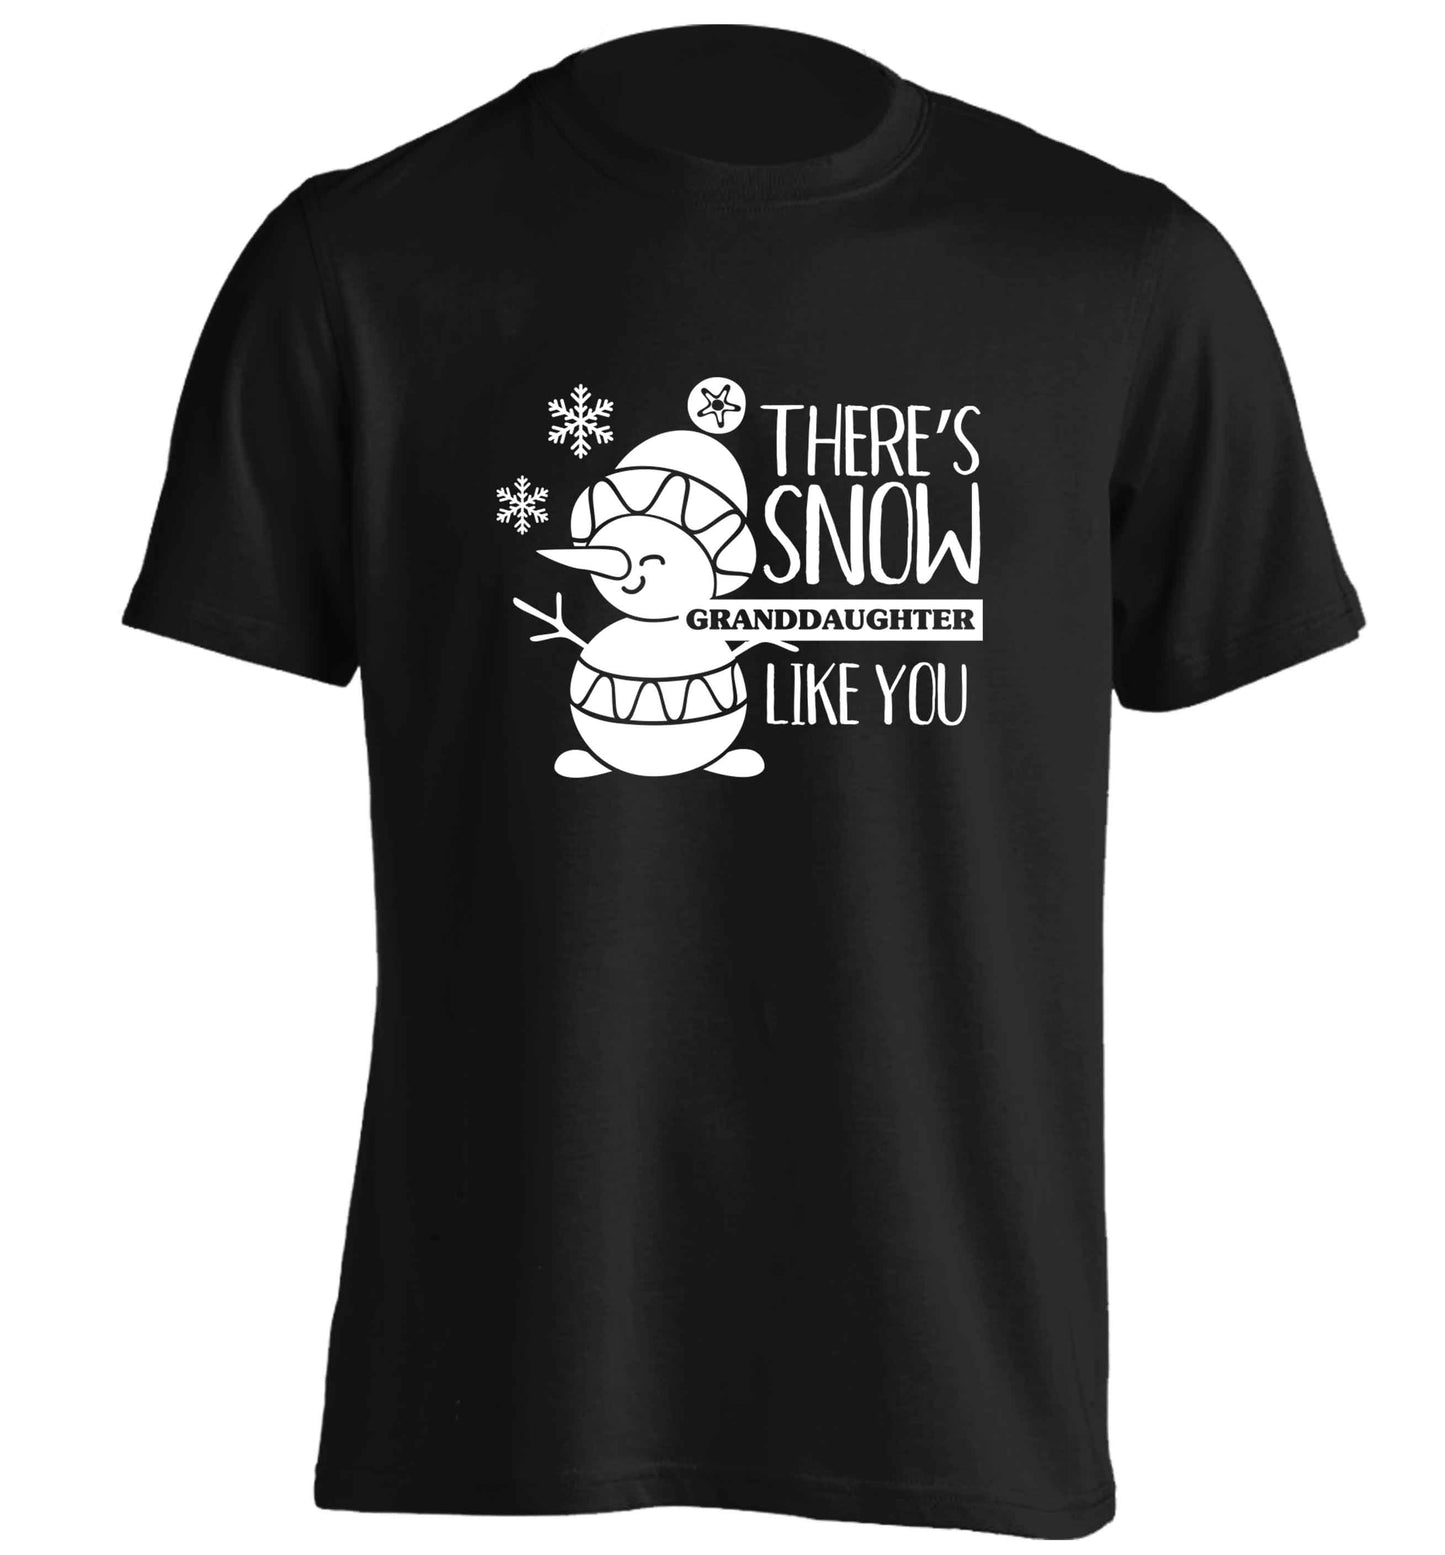 There's snow granddaughter like you adults unisex black Tshirt 2XL